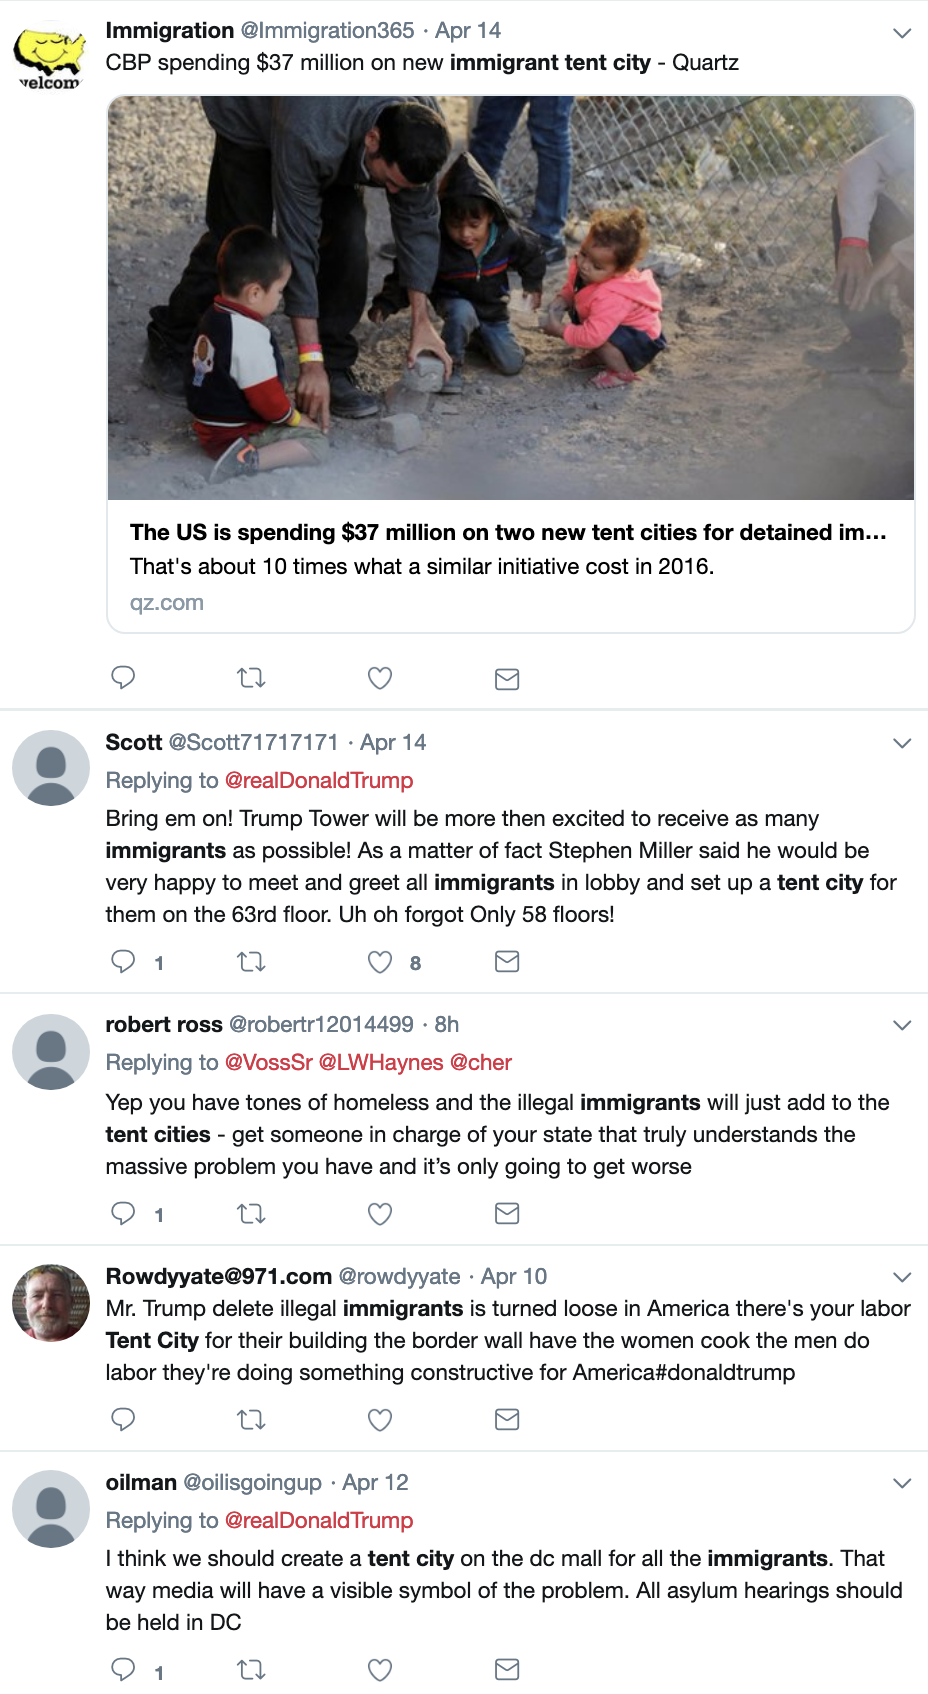 Screen-Shot-2019-04-15-at-2.33.12-PM Daily Beast Investigative Report Uncovers Inhumane Condition At Refugee Camps Corruption Crime Donald Trump Immigration Politics Racism Refugees Top Stories 